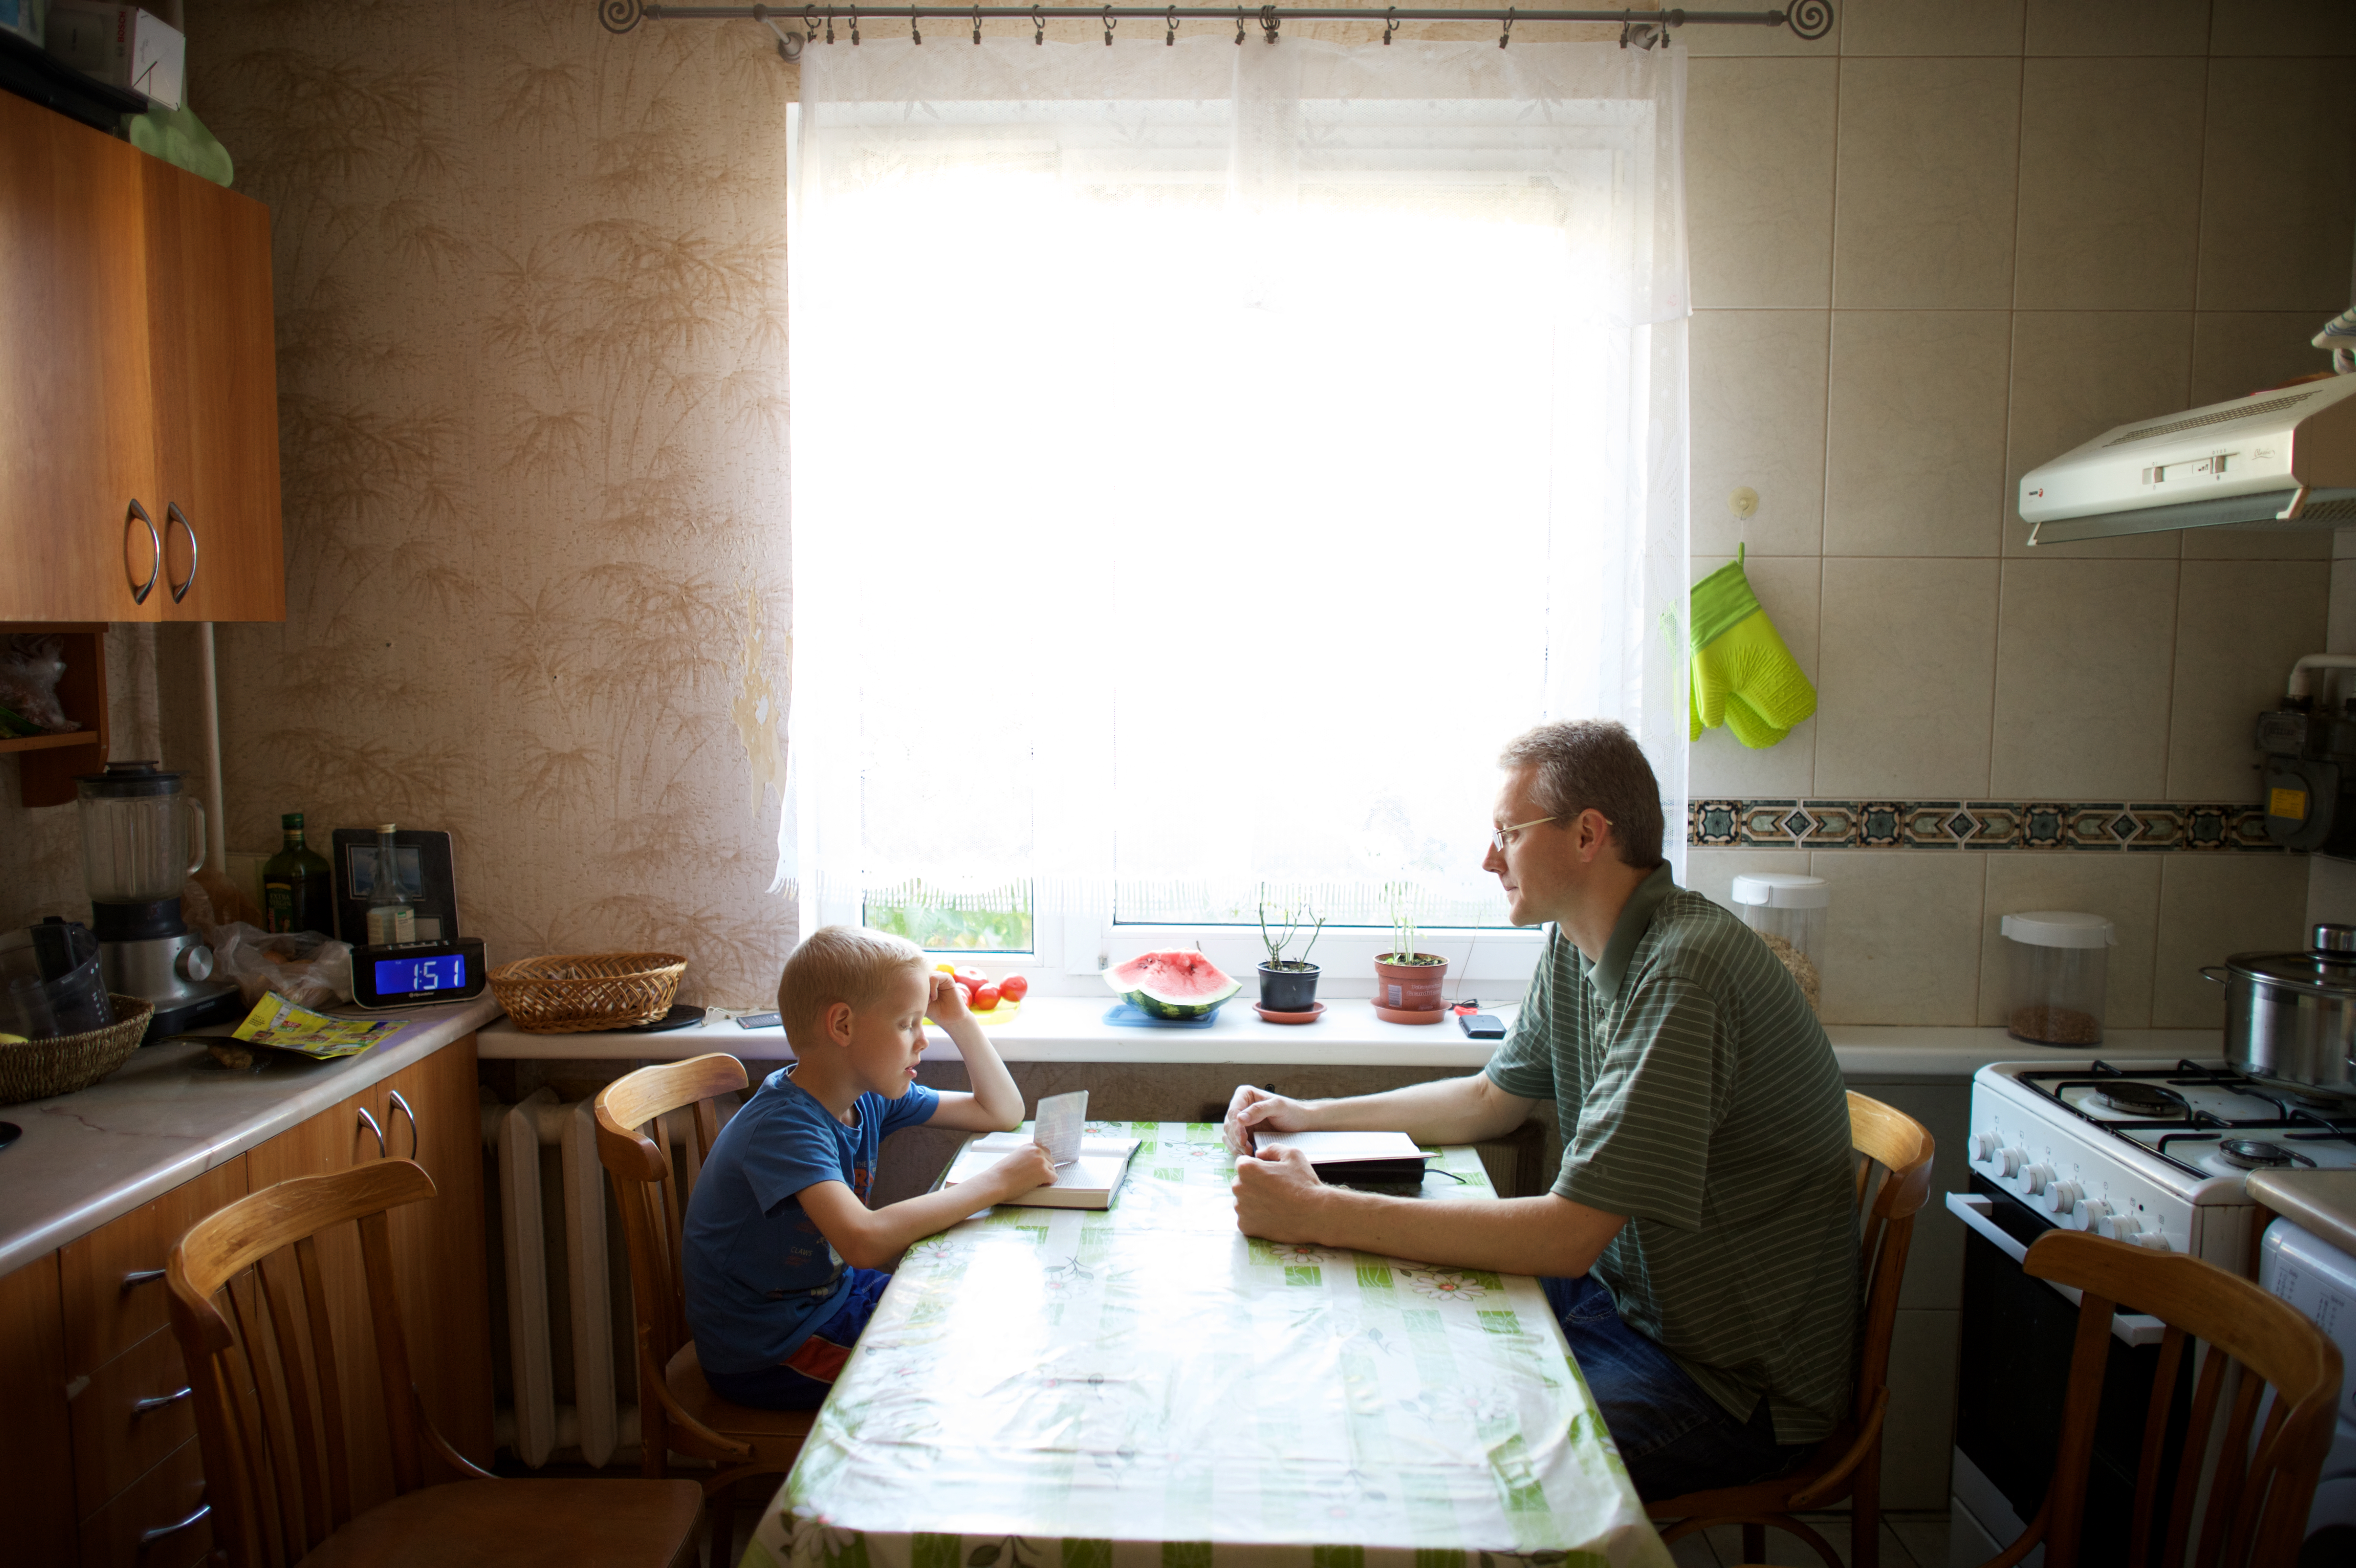 A Latvian father leads his family in scripture study at the table, his son reads.